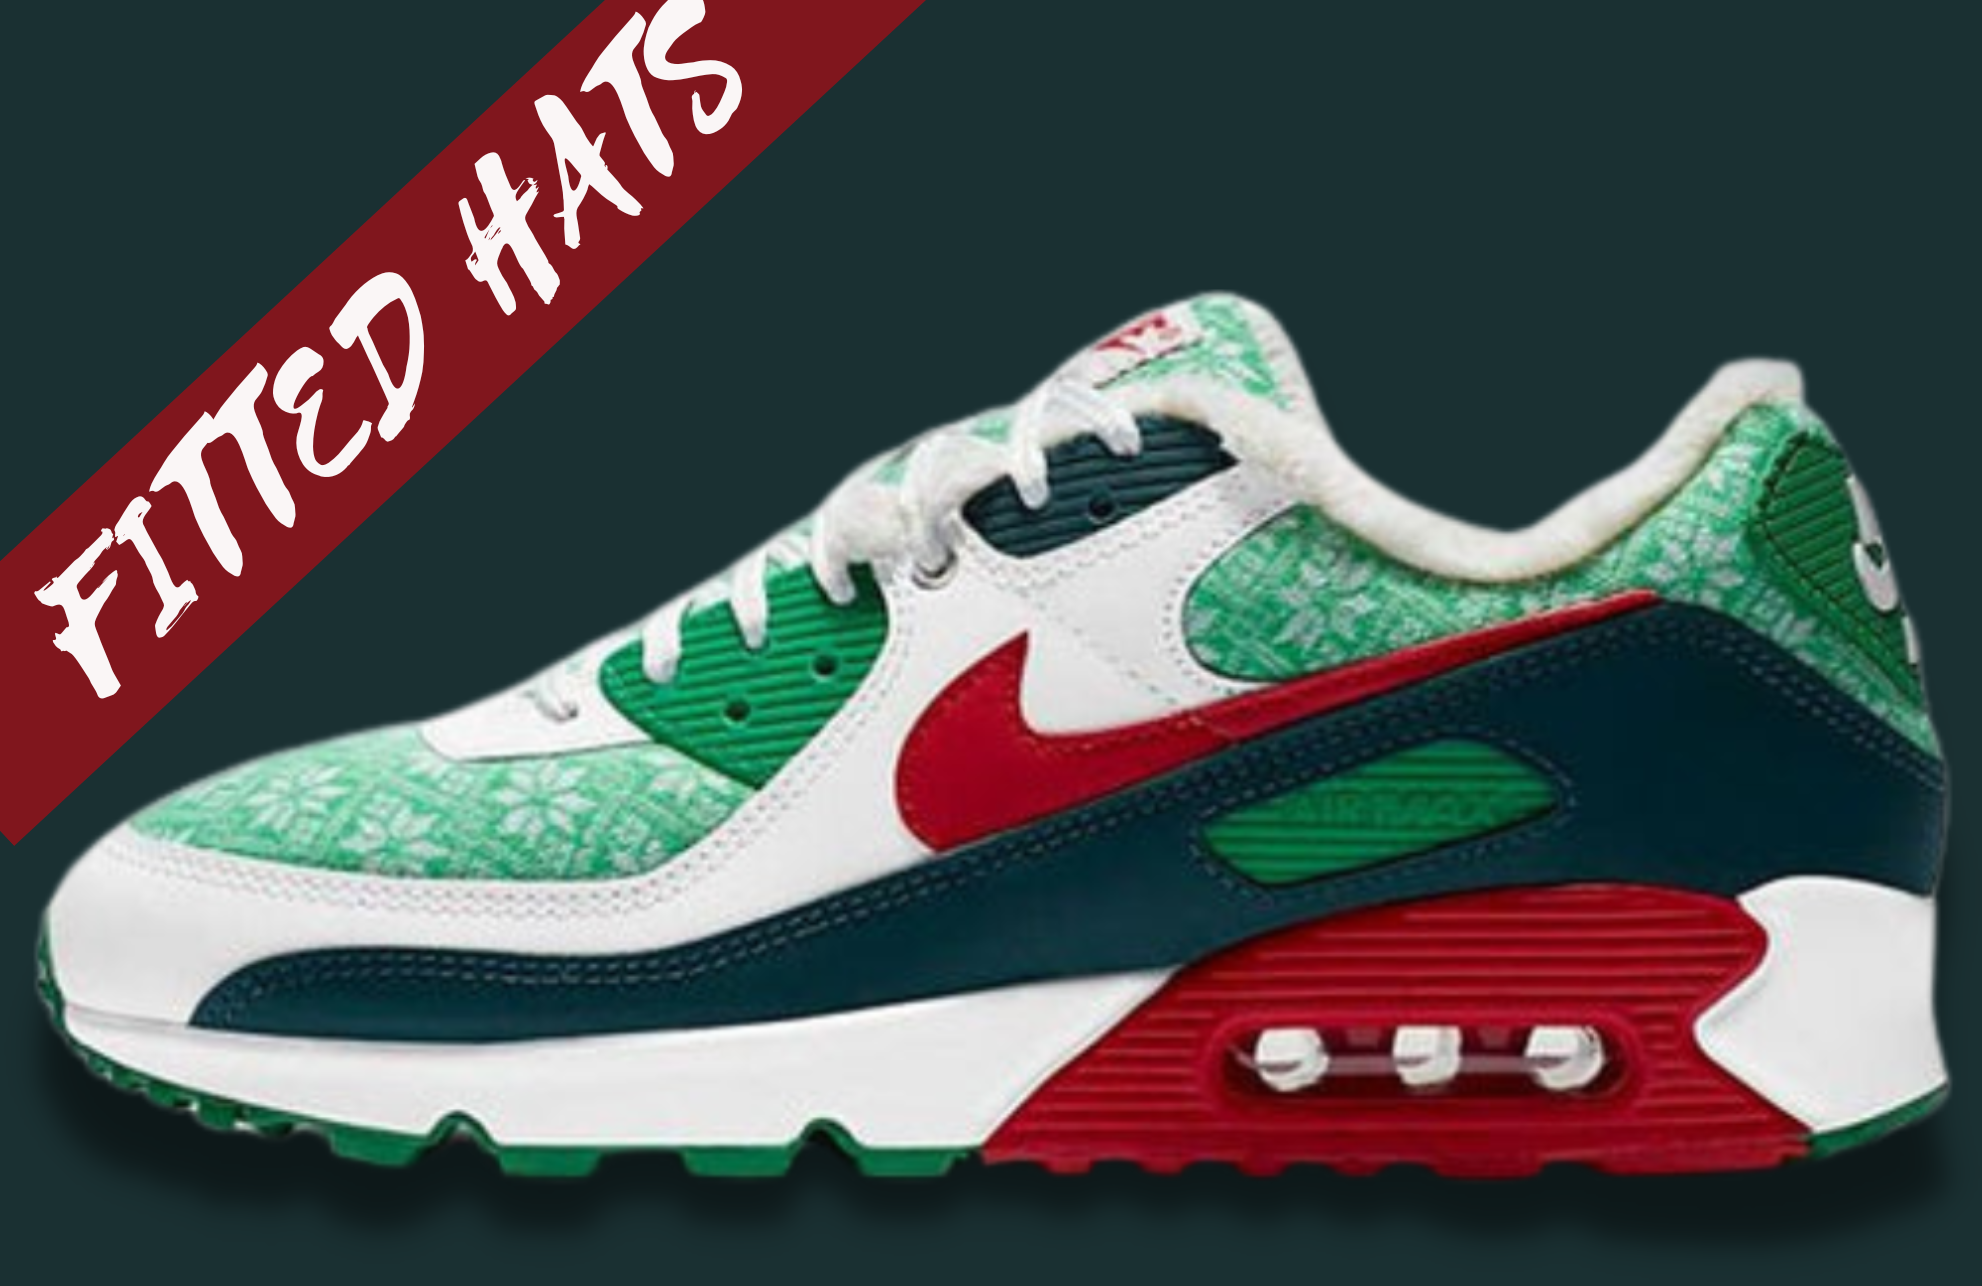 Nike Air Max Low Christmas Sweater